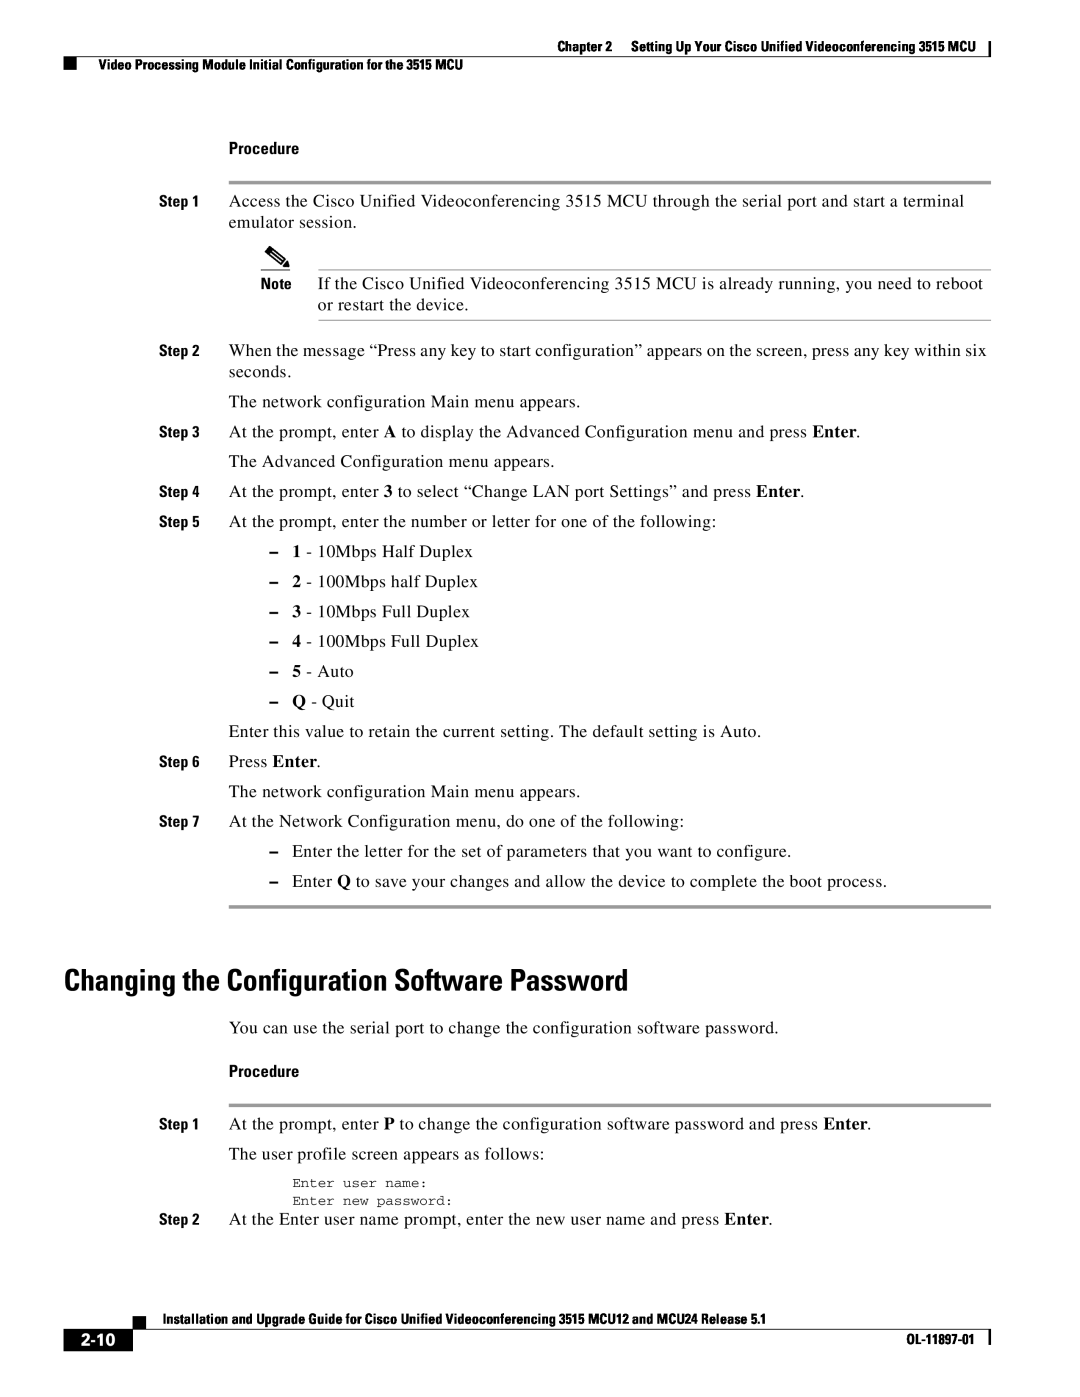 Cisco Systems MCU24 manual Changing the Configuration Software Password, 2-10, Press Enter 